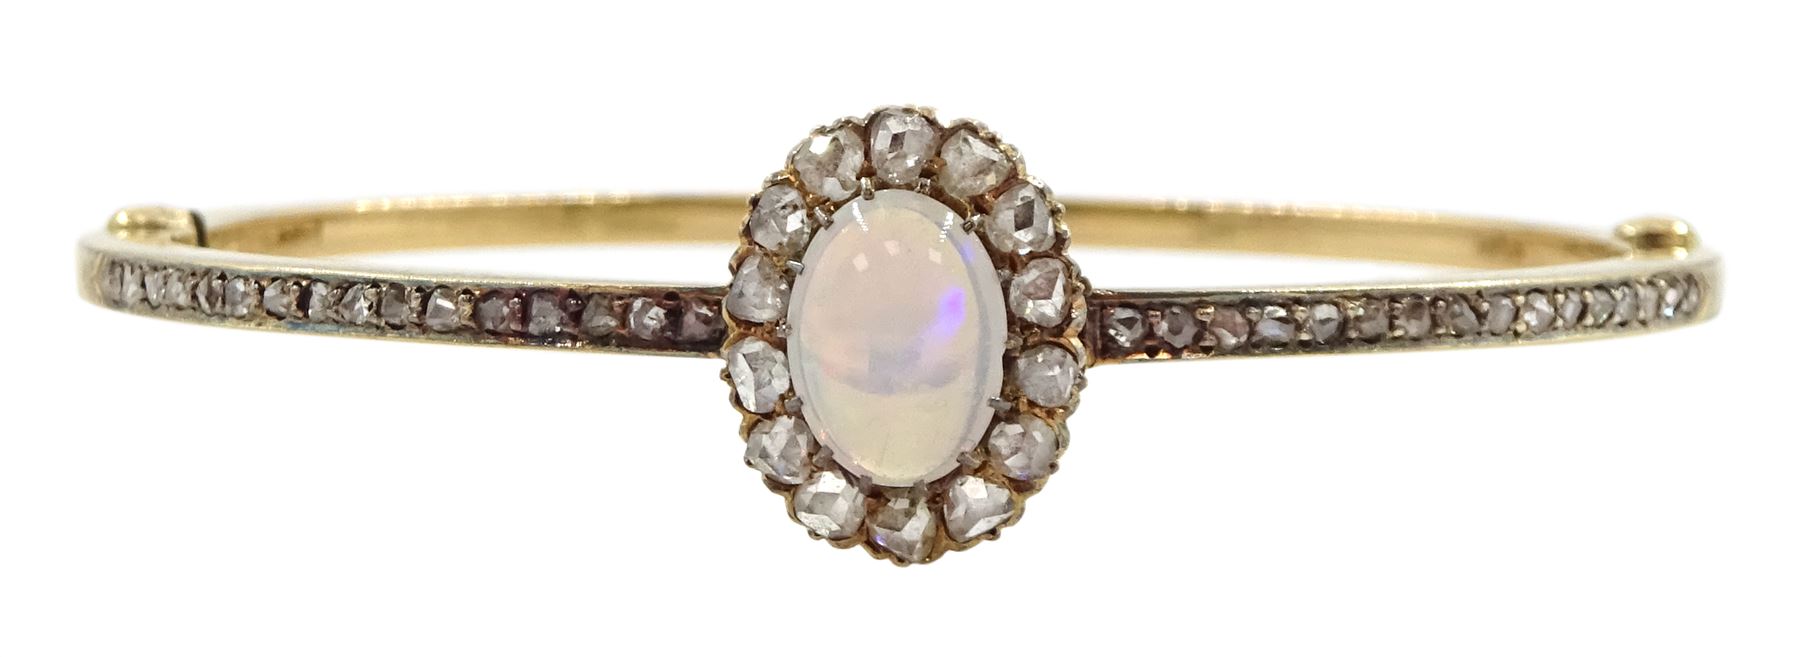 Early 20th century gold opal and diamond hinged bangle - Image 2 of 4